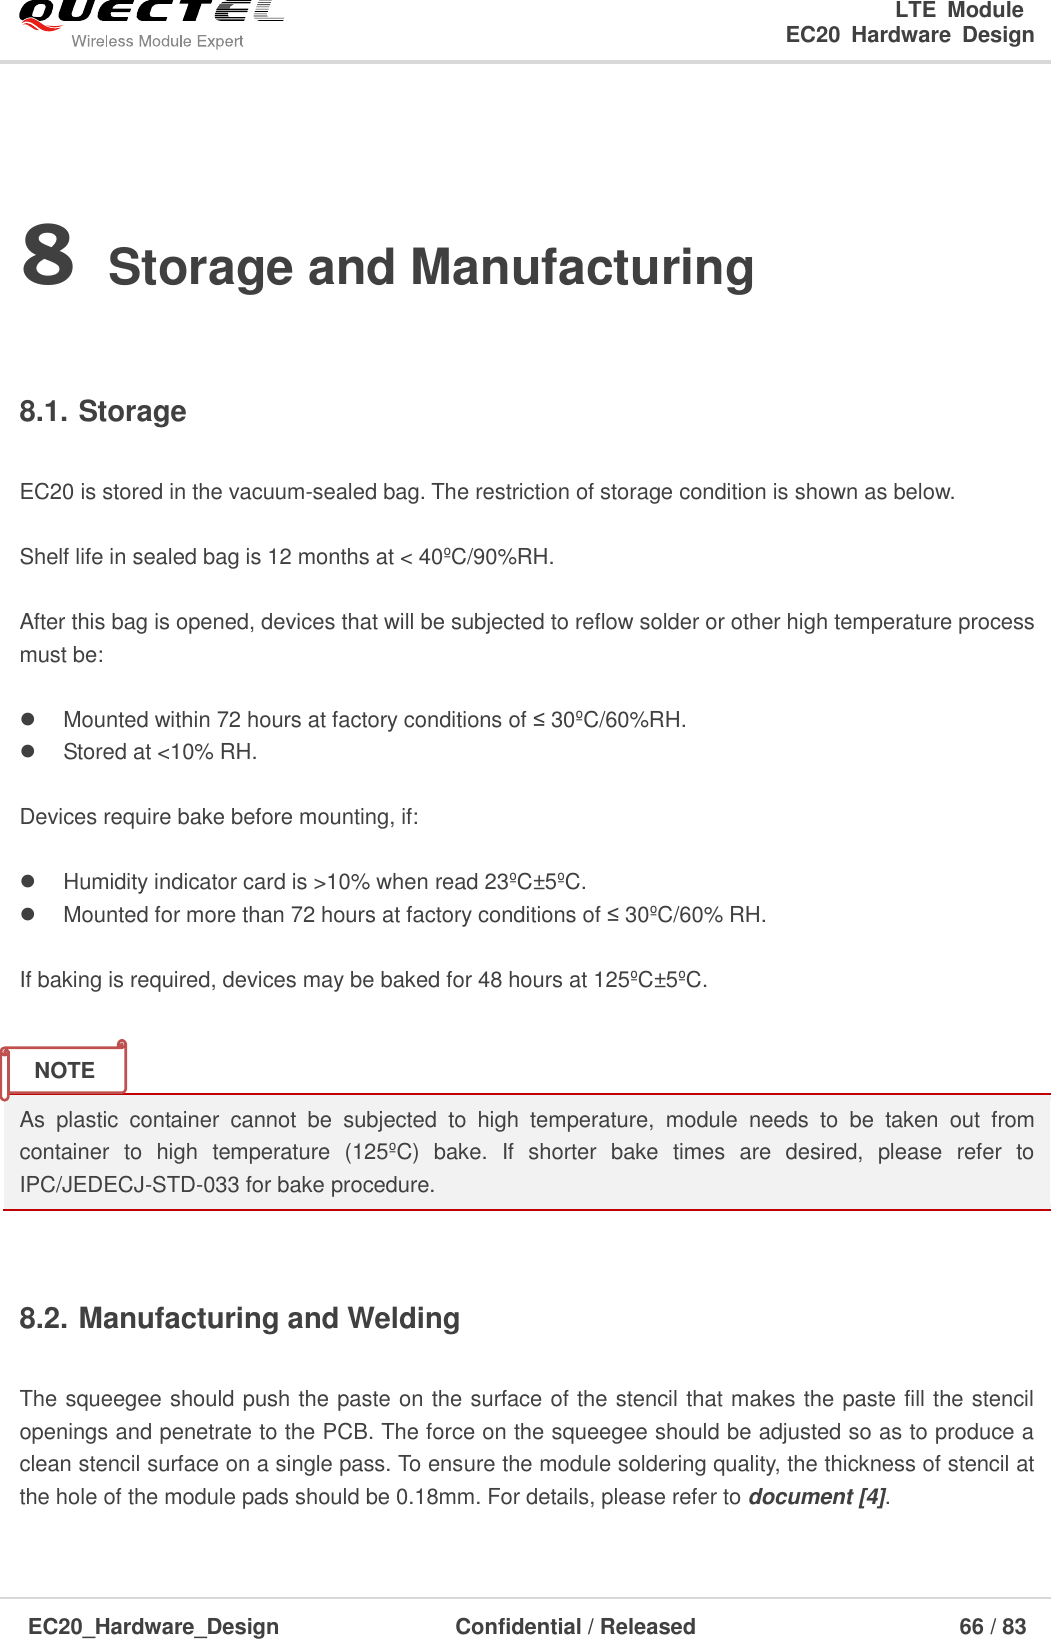                                                                        LTE  Module                                                                   EC20  Hardware  Design  EC20_Hardware_Design                  Confidential / Released                            66 / 83     8 Storage and Manufacturing  8.1. Storage  EC20 is stored in the vacuum-sealed bag. The restriction of storage condition is shown as below.    Shelf life in sealed bag is 12 months at &lt; 40ºC/90%RH.    After this bag is opened, devices that will be subjected to reflow solder or other high temperature process must be:    Mounted within 72 hours at factory conditions of ≤ 30ºC/60%RH.   Stored at &lt;10% RH.  Devices require bake before mounting, if:    Humidity indicator card is &gt;10% when read 23ºC±5ºC.   Mounted for more than 72 hours at factory conditions of ≤ 30ºC/60% RH.  If baking is required, devices may be baked for 48 hours at 125ºC±5ºC.   As  plastic  container  cannot  be  subjected  to  high  temperature,  module  needs  to  be  taken  out  from container  to  high  temperature  (125ºC)  bake.  If  shorter  bake  times  are  desired,  please  refer  to IPC/JEDECJ-STD-033 for bake procedure.  8.2. Manufacturing and Welding  The squeegee should push the paste on the surface of the stencil that makes the paste fill the stencil openings and penetrate to the PCB. The force on the squeegee should be adjusted so as to produce a clean stencil surface on a single pass. To ensure the module soldering quality, the thickness of stencil at the hole of the module pads should be 0.18mm. For details, please refer to document [4].  NOTE 